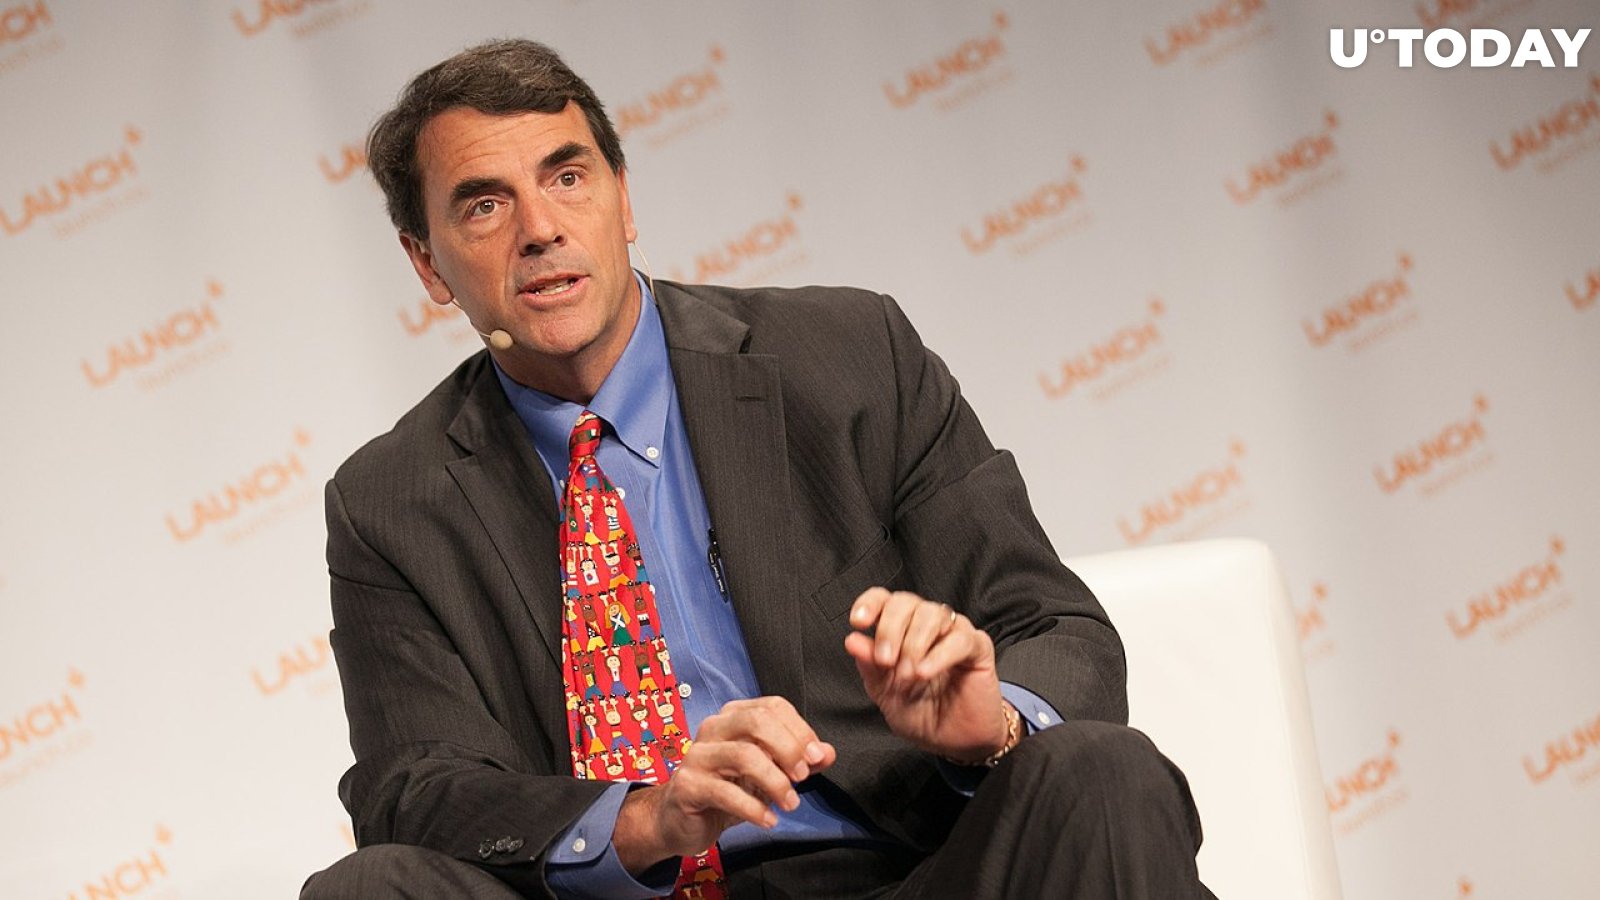 Bitcoin Predicted to Hit $250,000 in Six Months by Tim Draper 